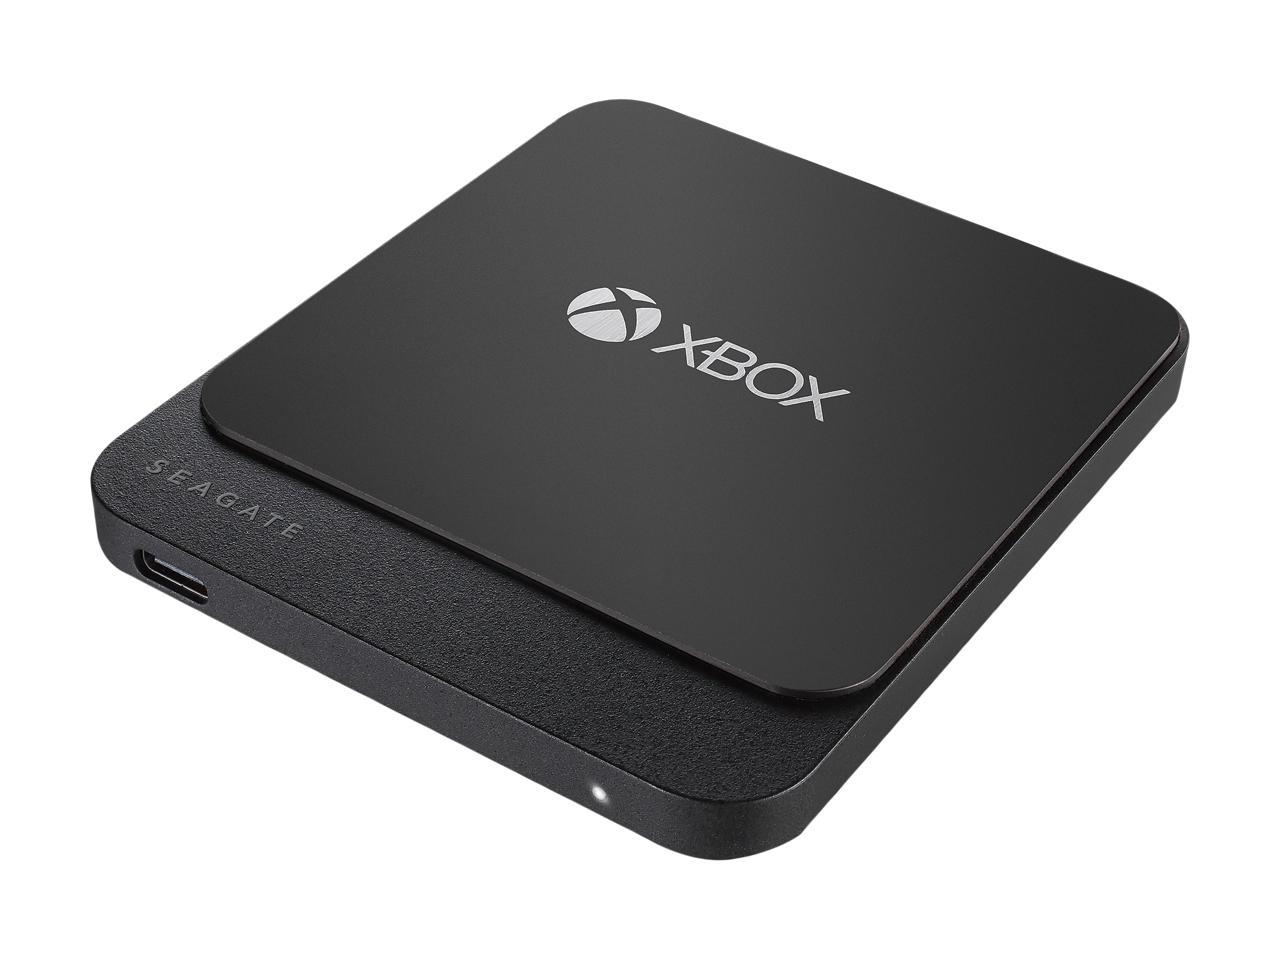 Seagate Xbox Game Drive 500GB USB 3.0 External / Portable Solid State Drive - Designed for Xbox One (STHB500401)